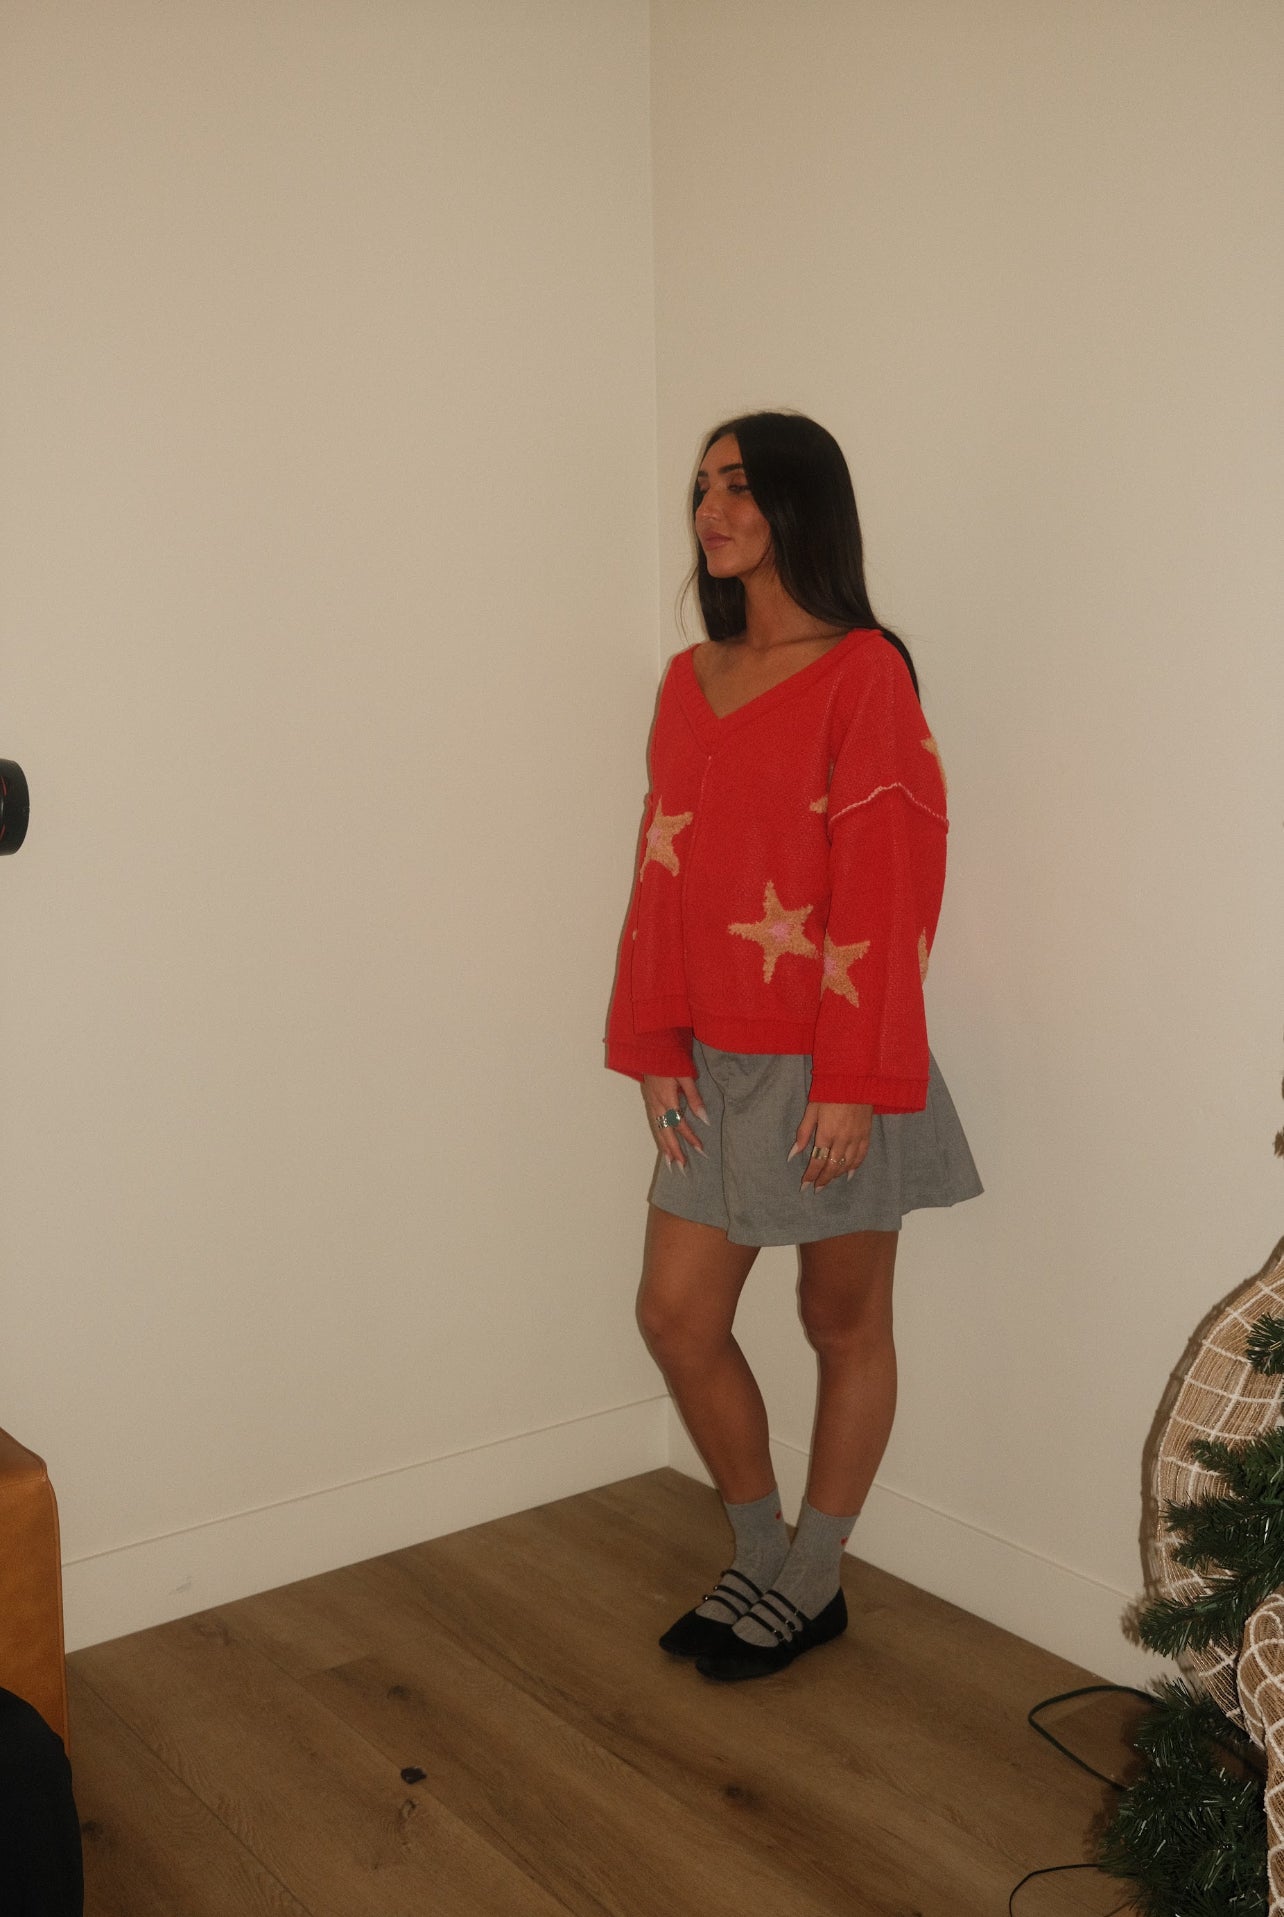 Riot Candy Apple Sweater